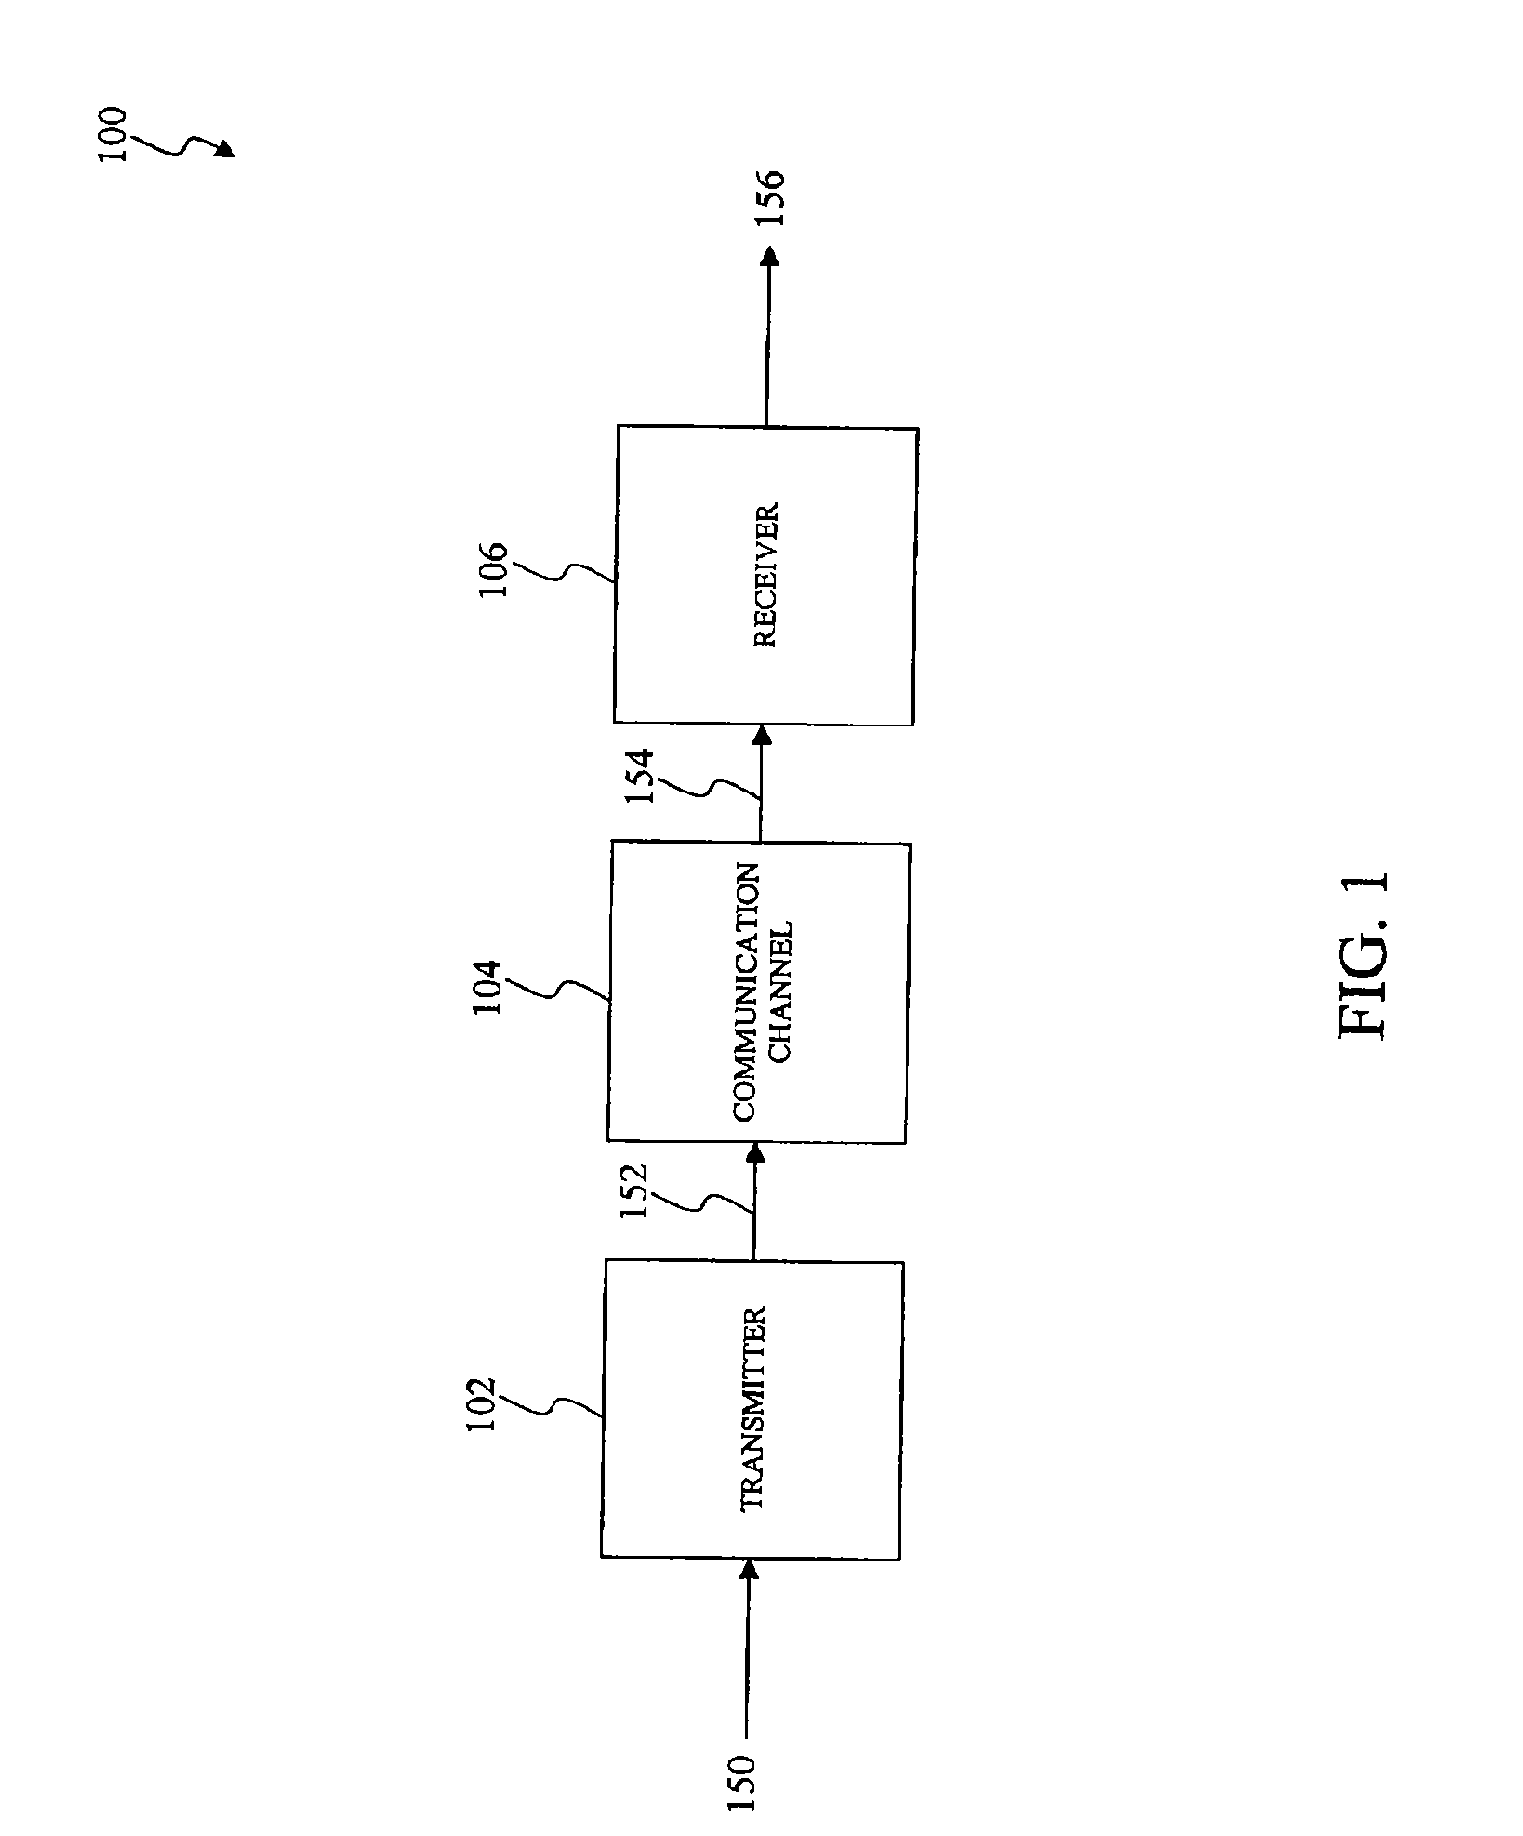 Low Density Parity Check (LDPC) Encoded Higher Order Modulation